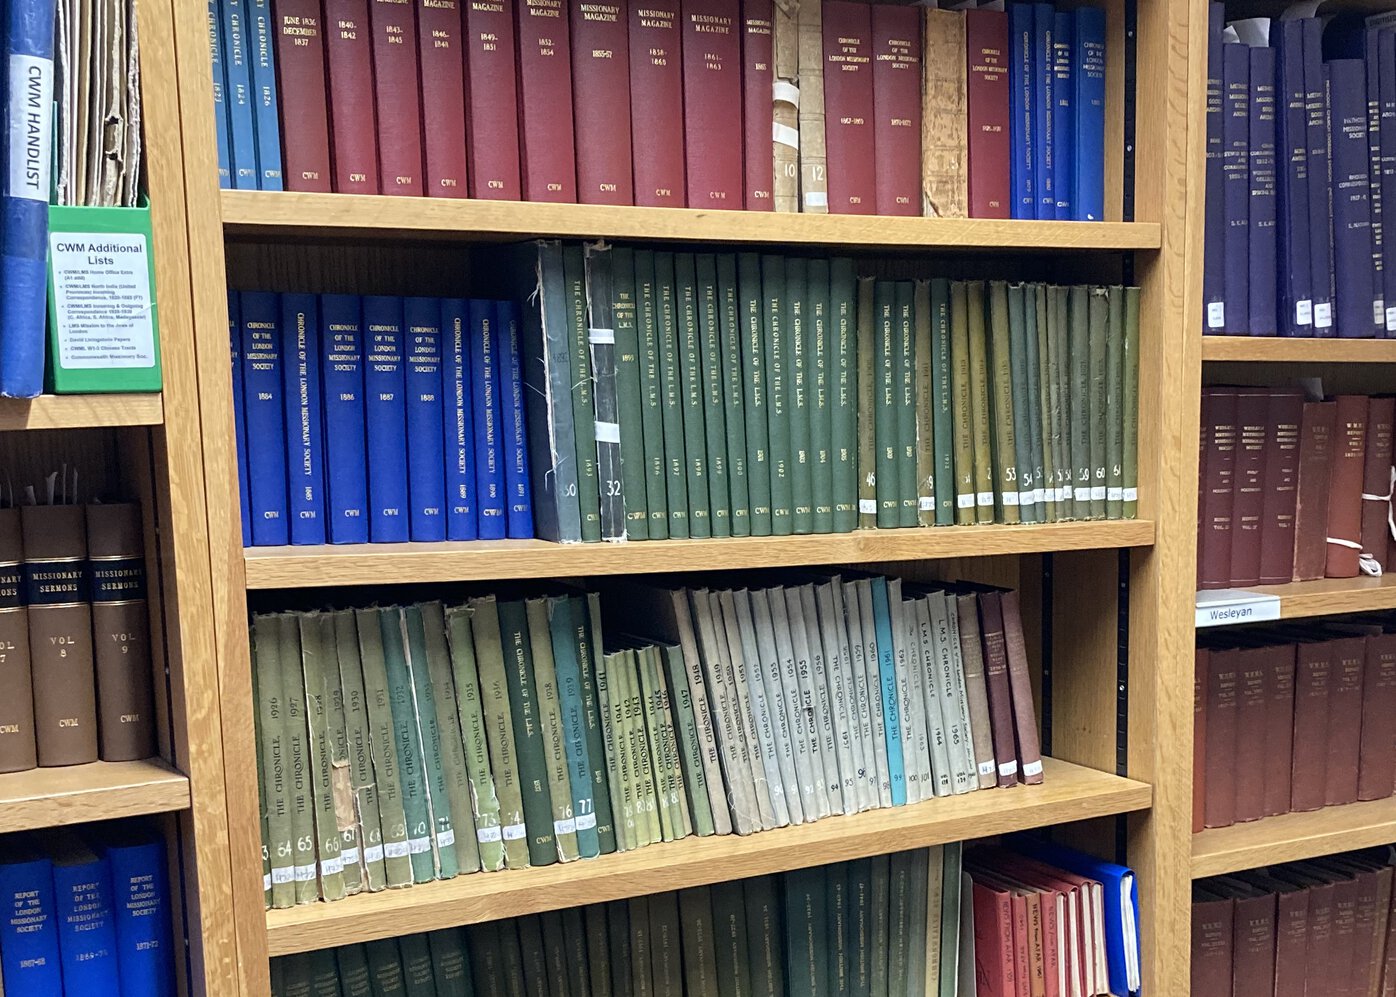 A series of bound volumes of varying colors on several bookshelves.